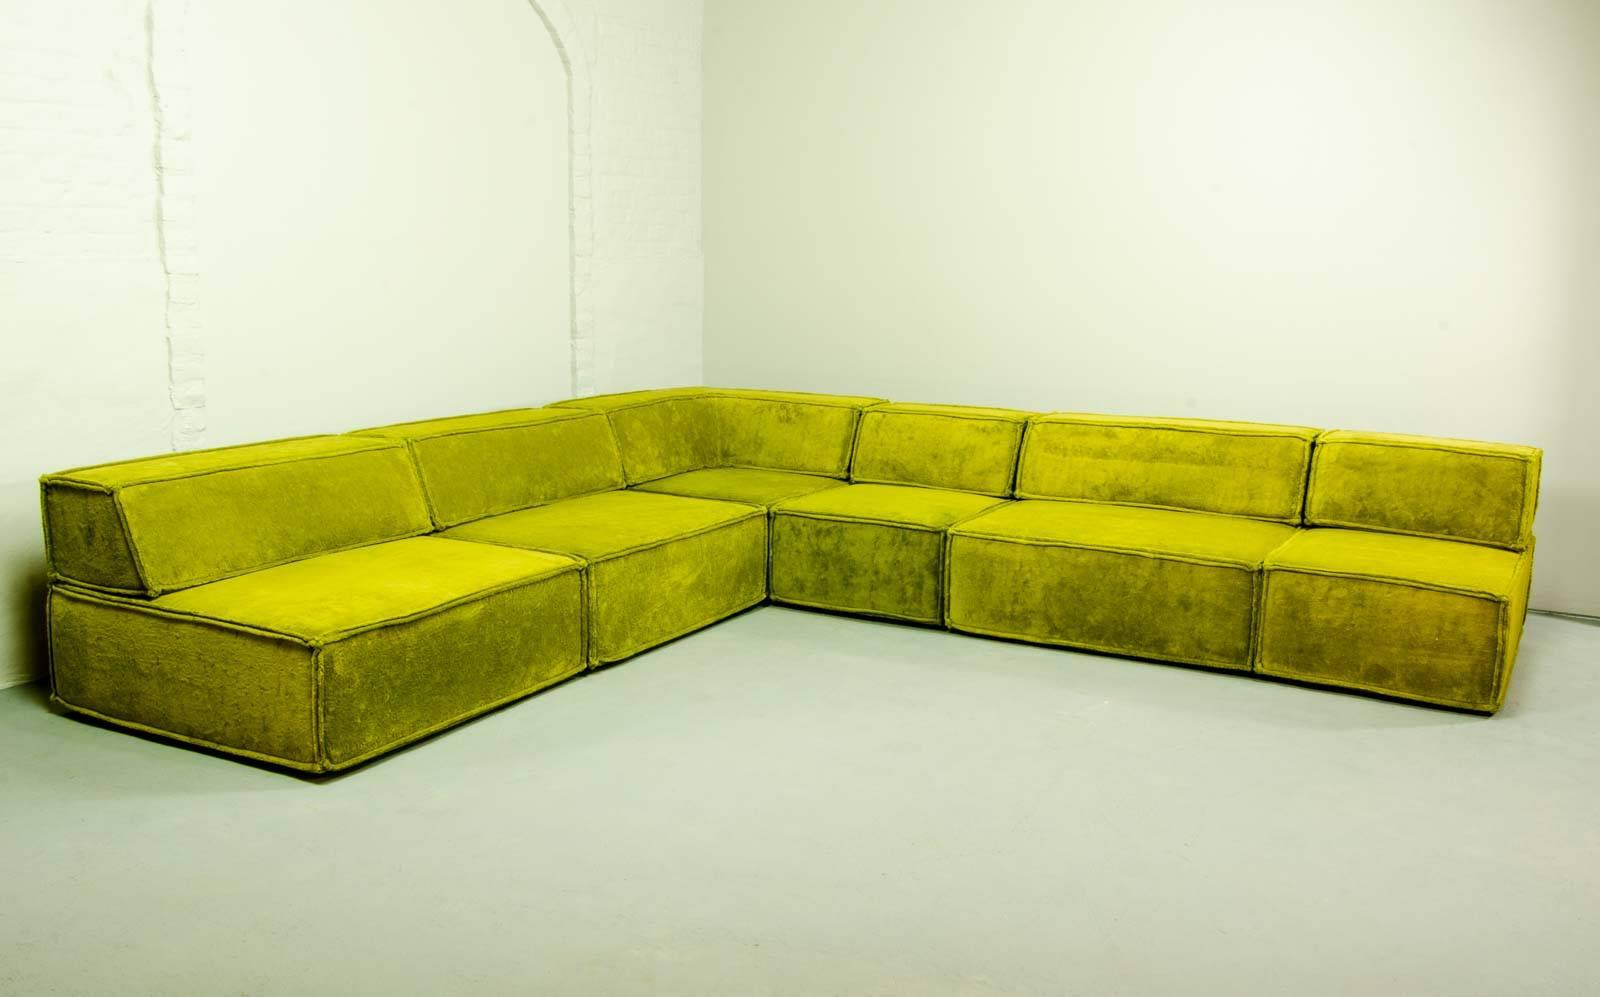 Beautiful and high quality COR trio modular lounge Sofaset by Team Form AG. Designed and developed in the 1970s with subtle soft velvet avocado green upholstery. This large seating group consists of 6 elements (4 square and 2 rectangular) including